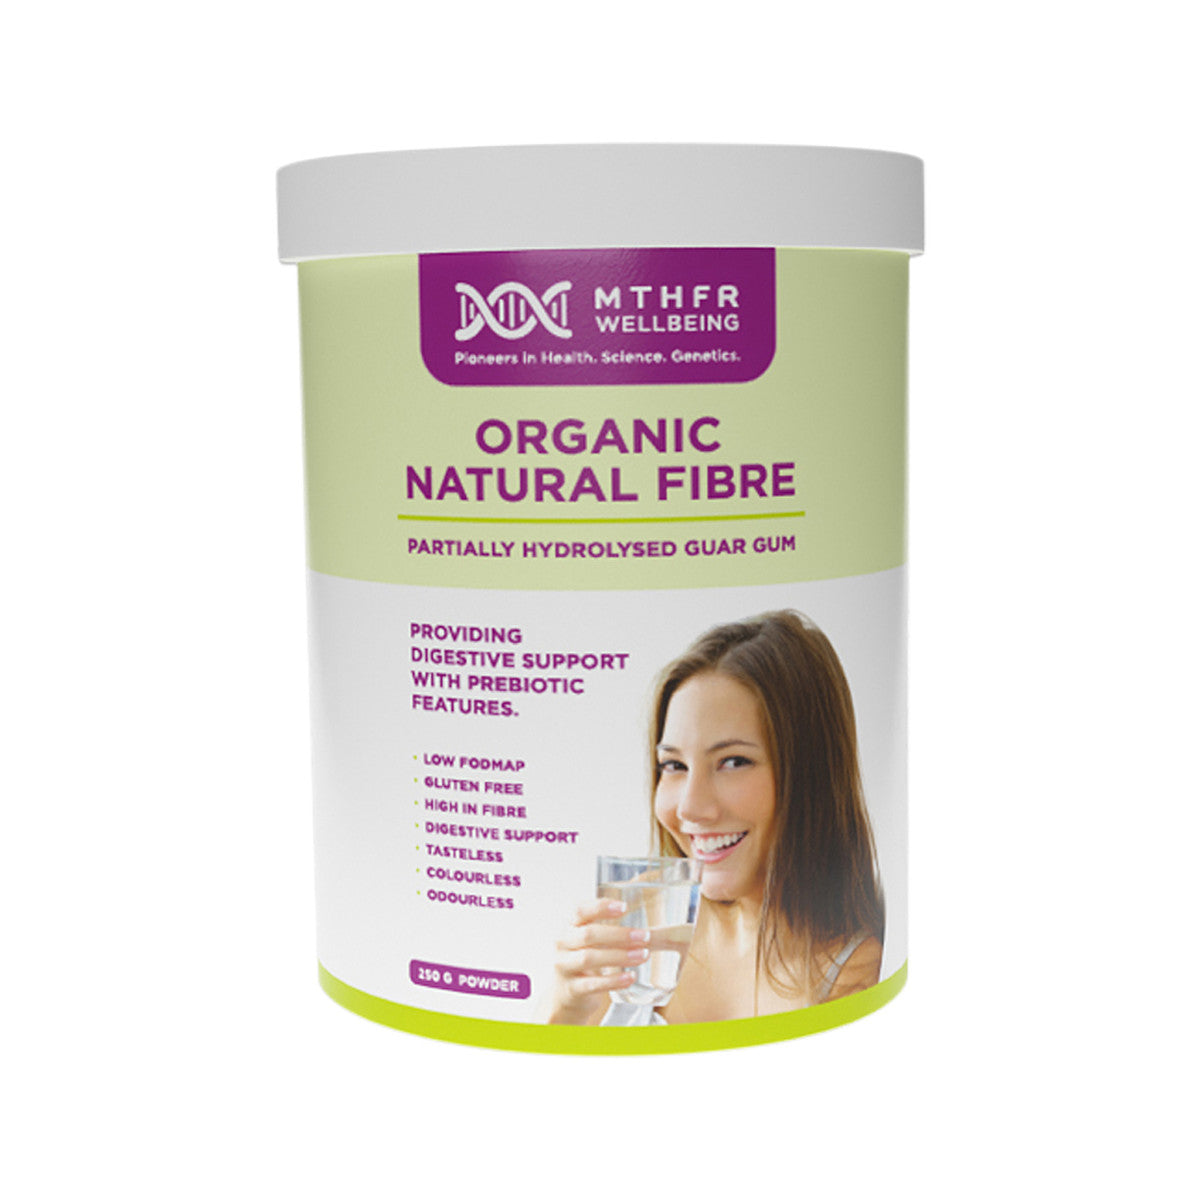 MTHFR Wellbeing - Organic Natural Fibre (Partially Hydrolysed Guar Gum)